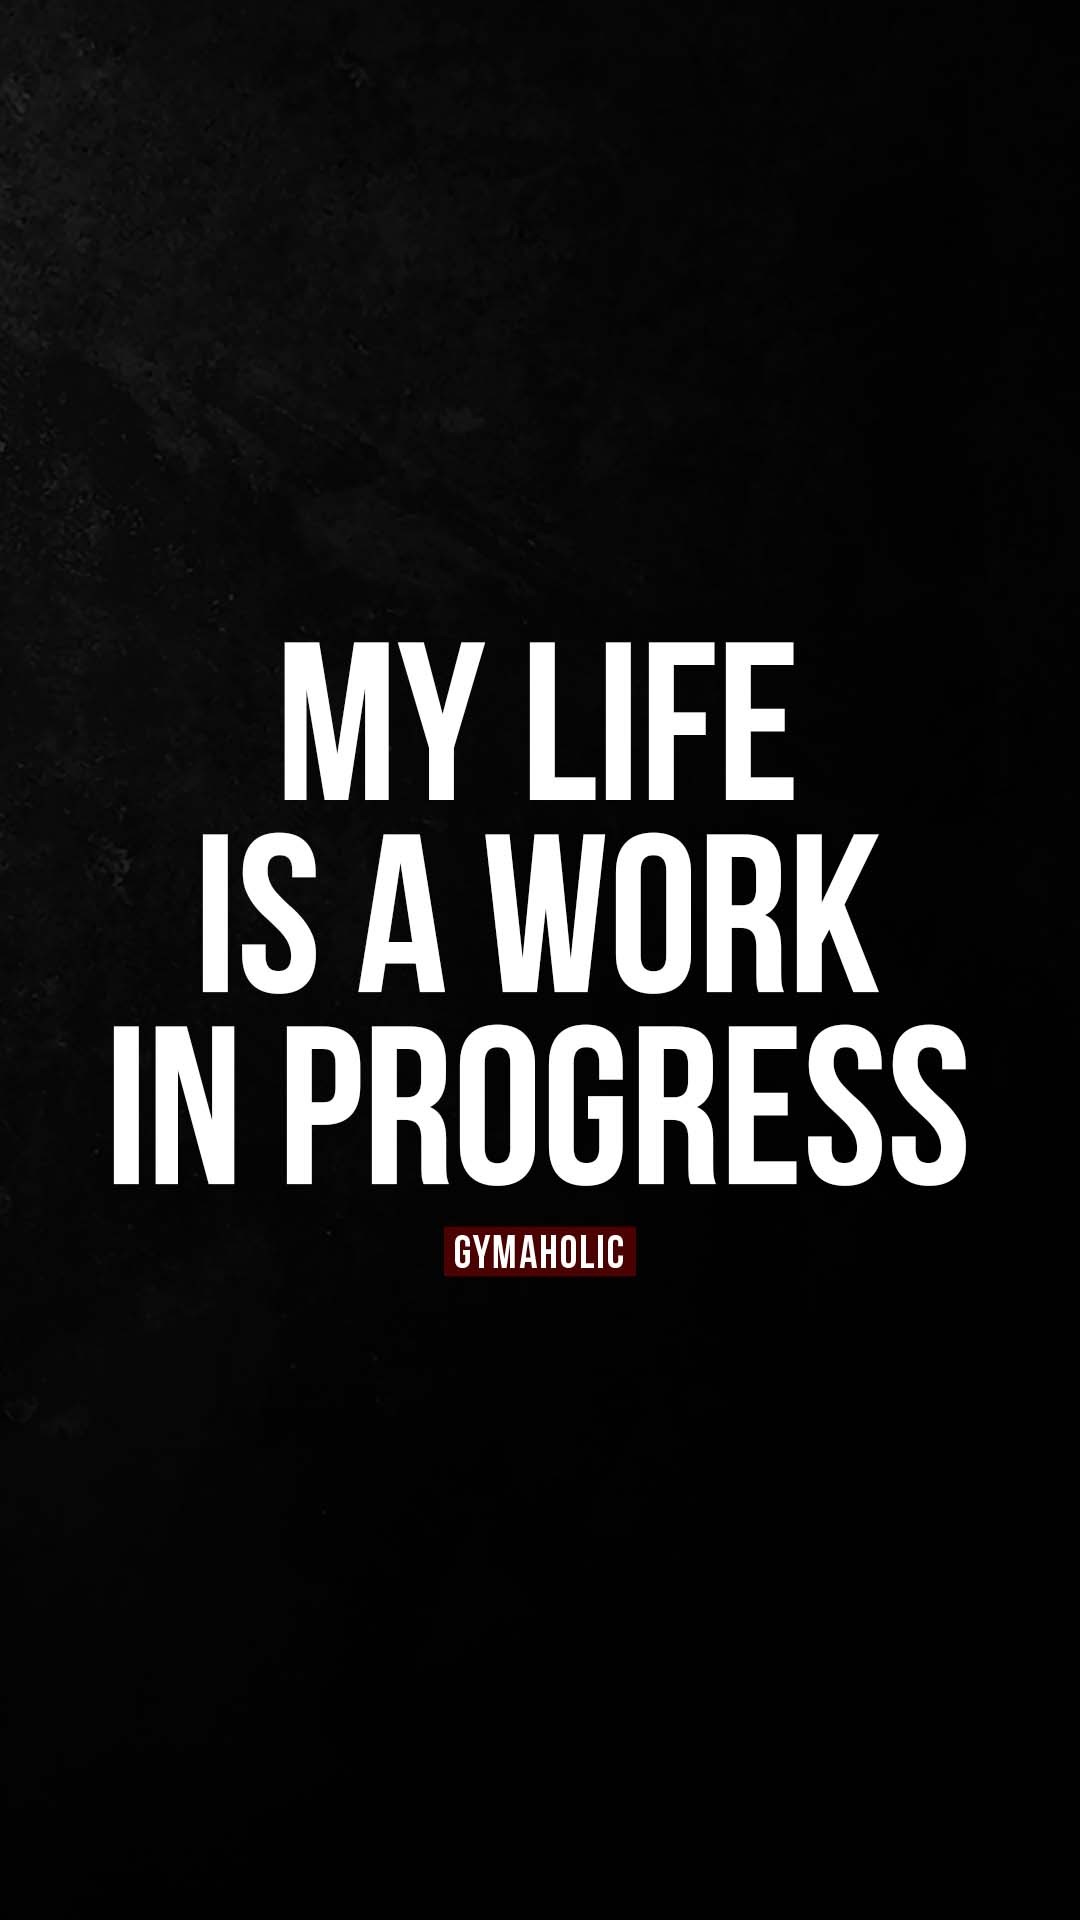 My life is a work in progress